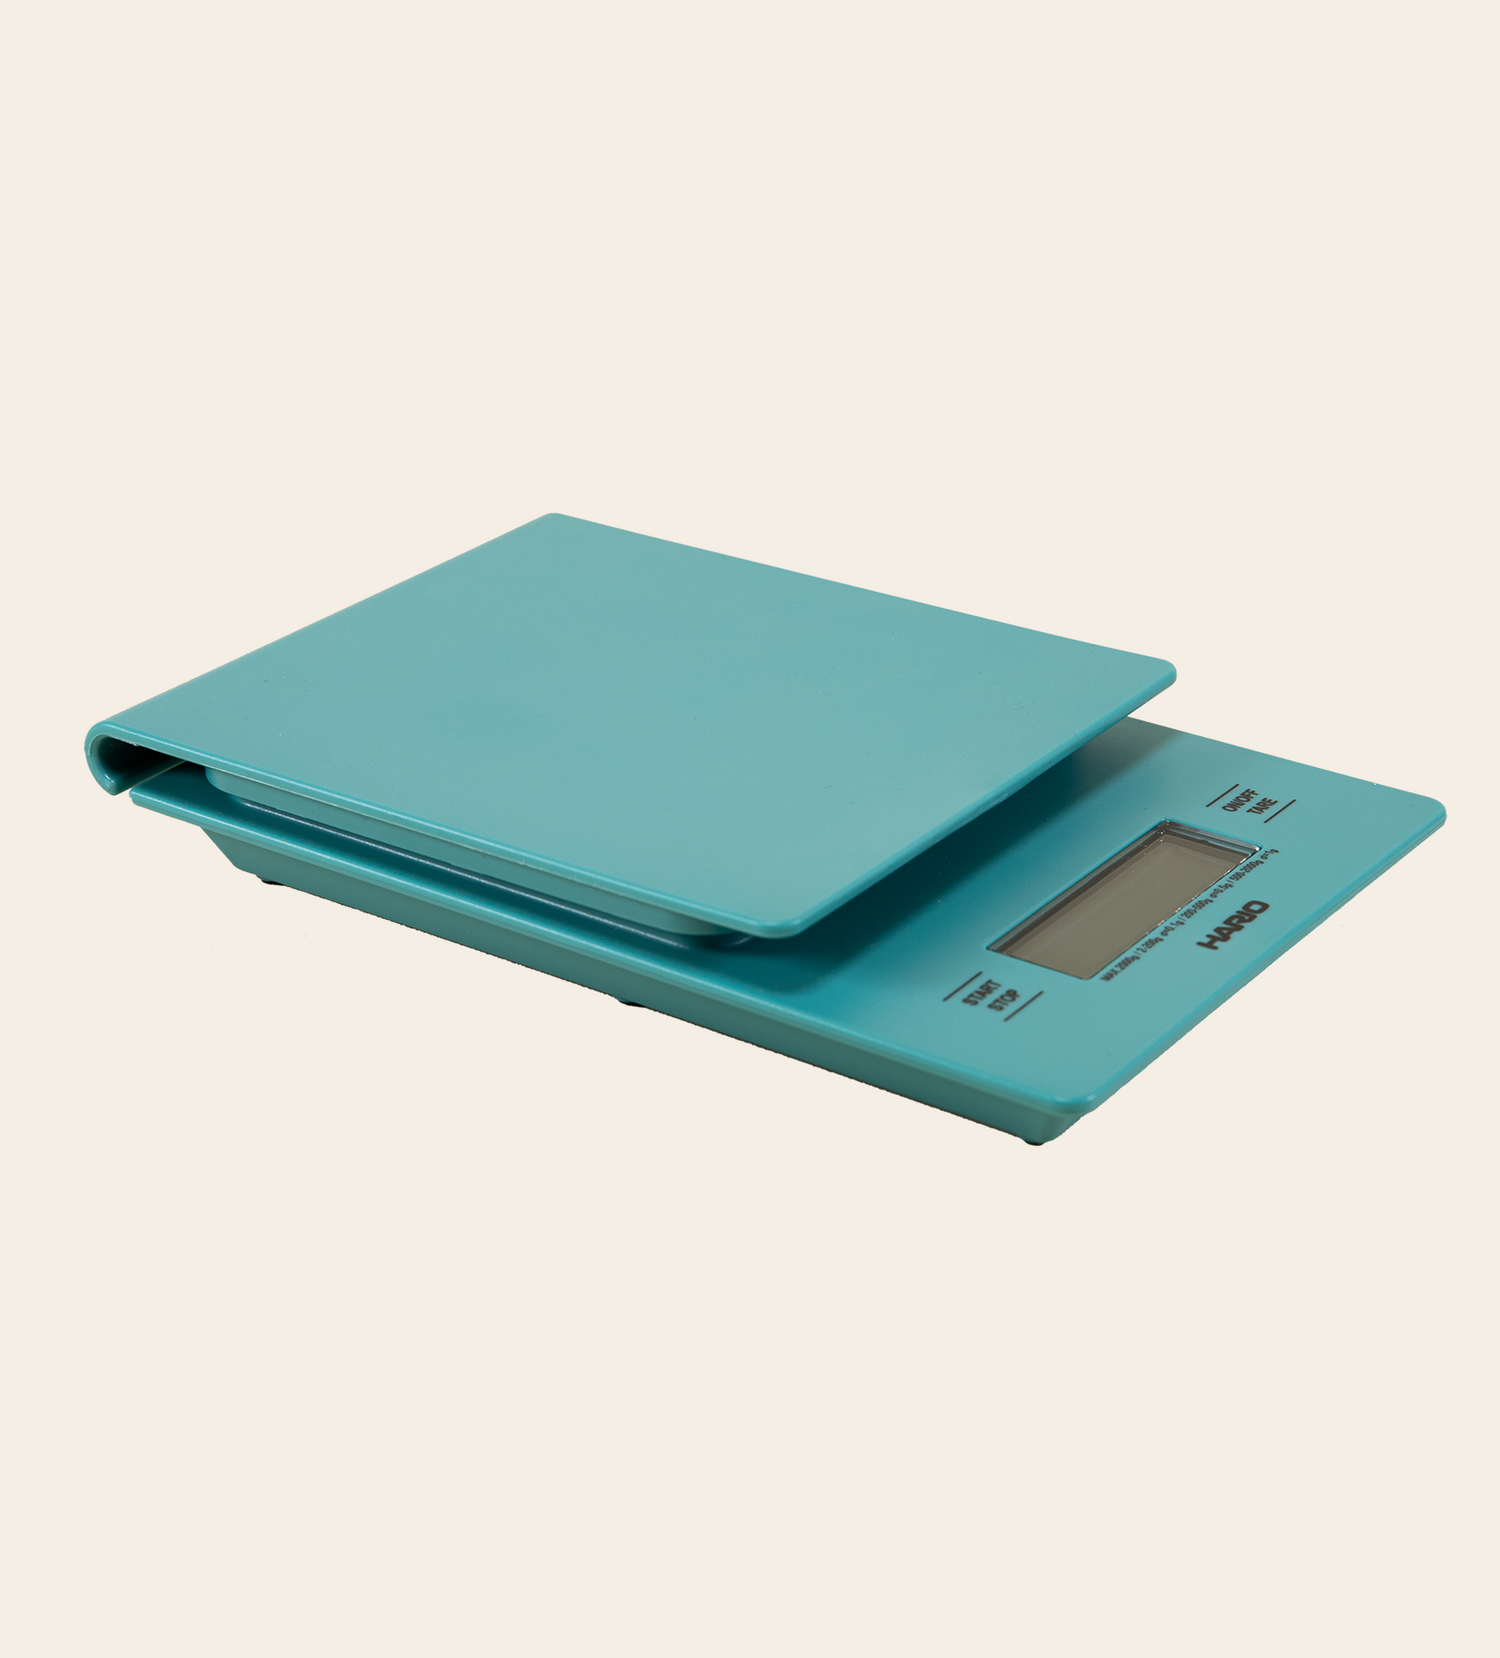 Hario V60 Drip Scale - Turquoise